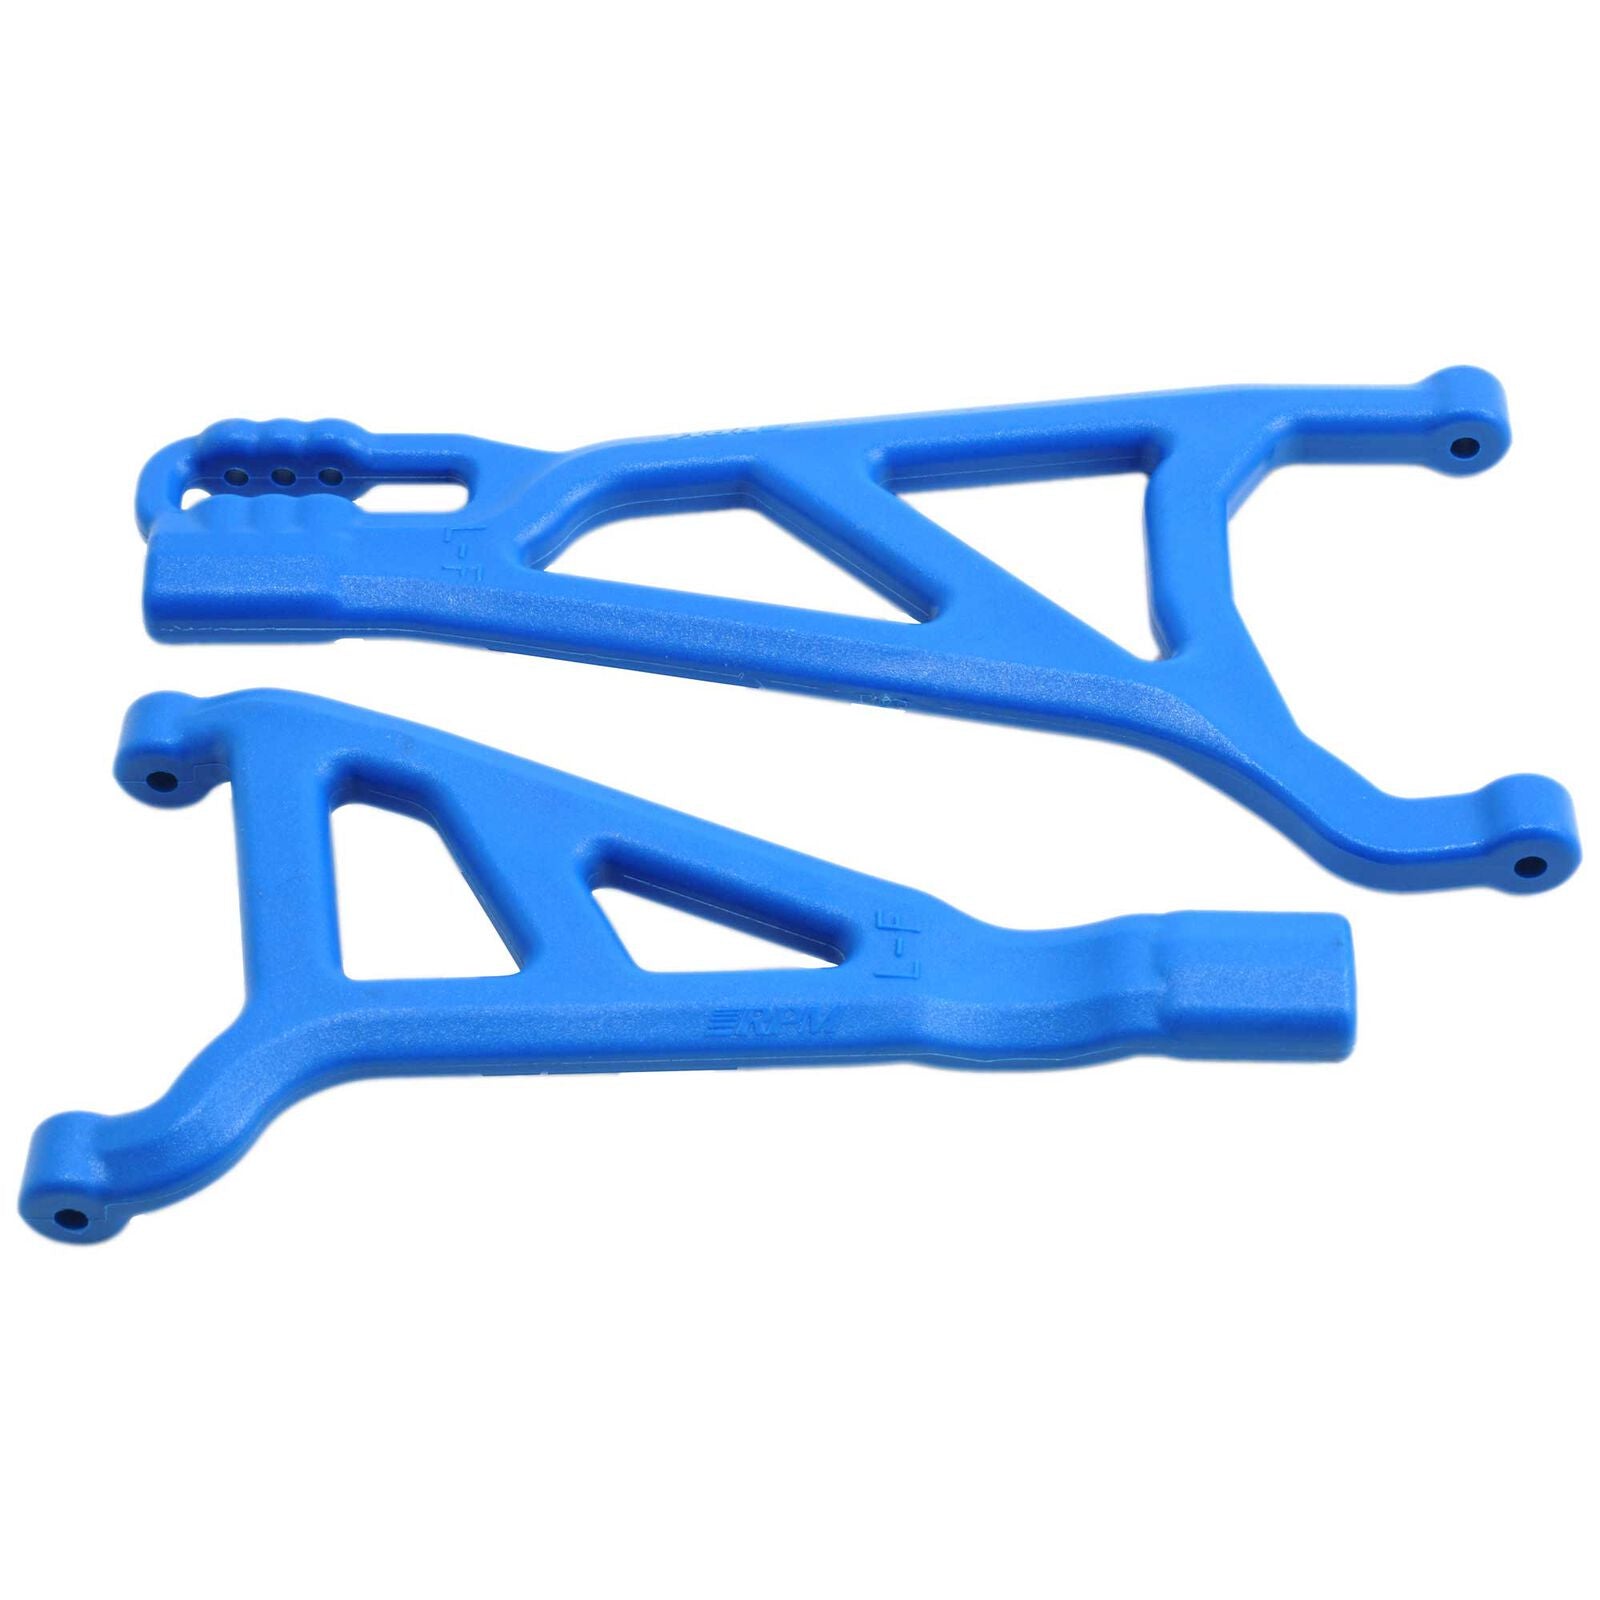 RPM 81515 Front Left A-Arms, for Traxxas E-Revo 2.0 Brushless Truck, Blue